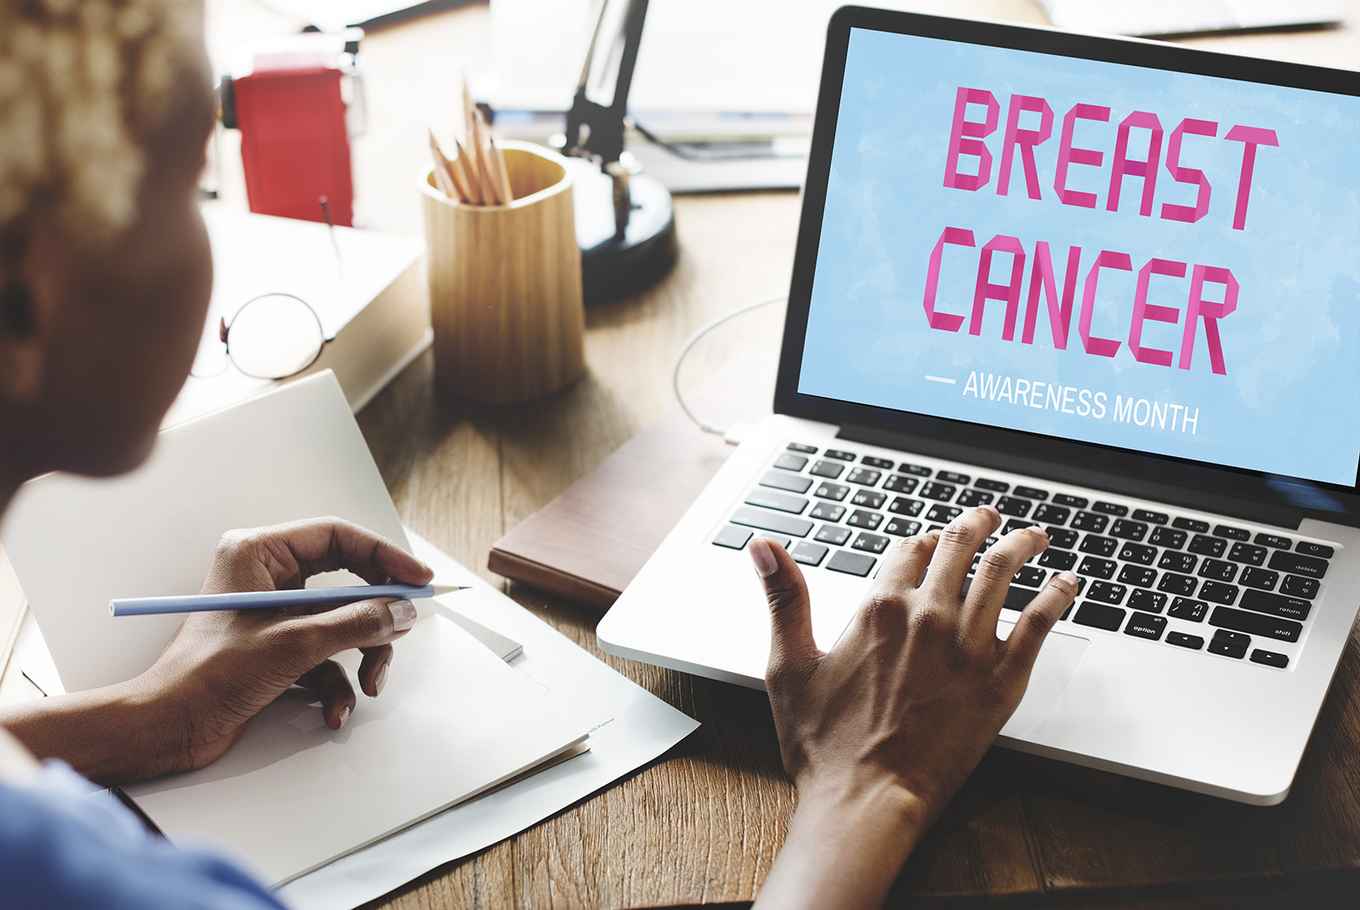 Woman looks online at information about breast cancer